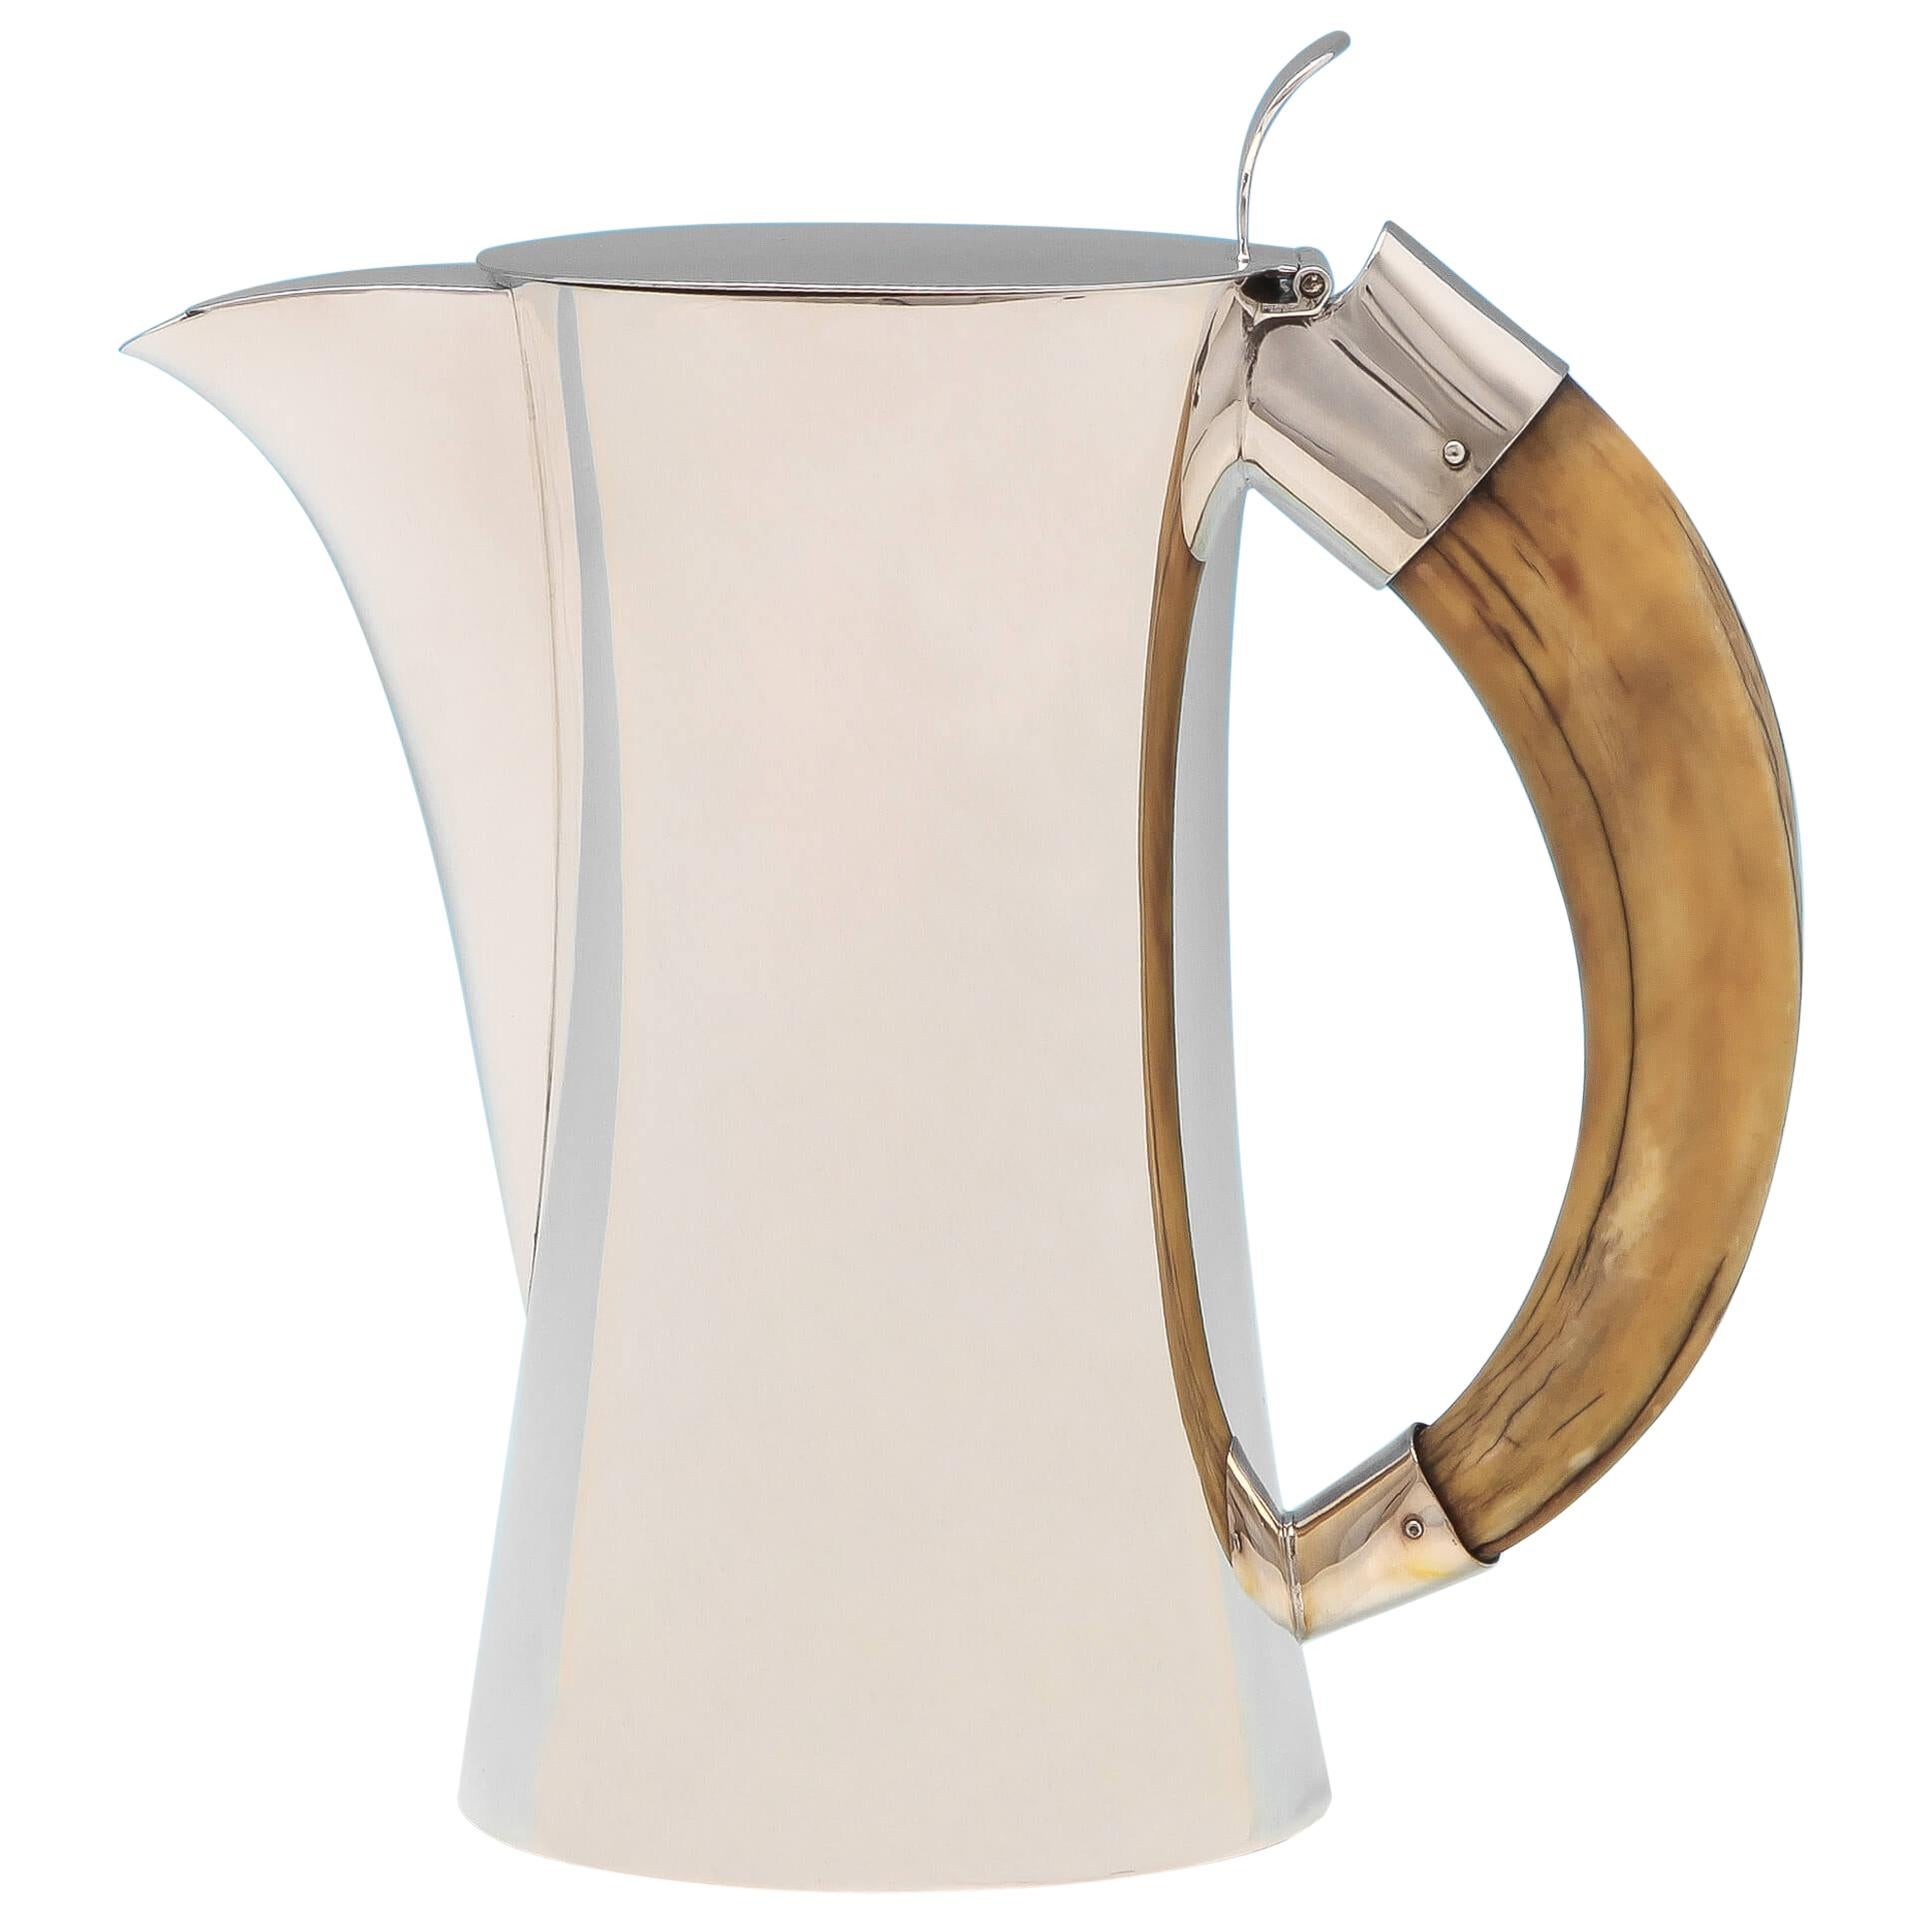 Aesthetic Period Sterling Silver Water Jug With Tusk Handle by Heath & Middleton